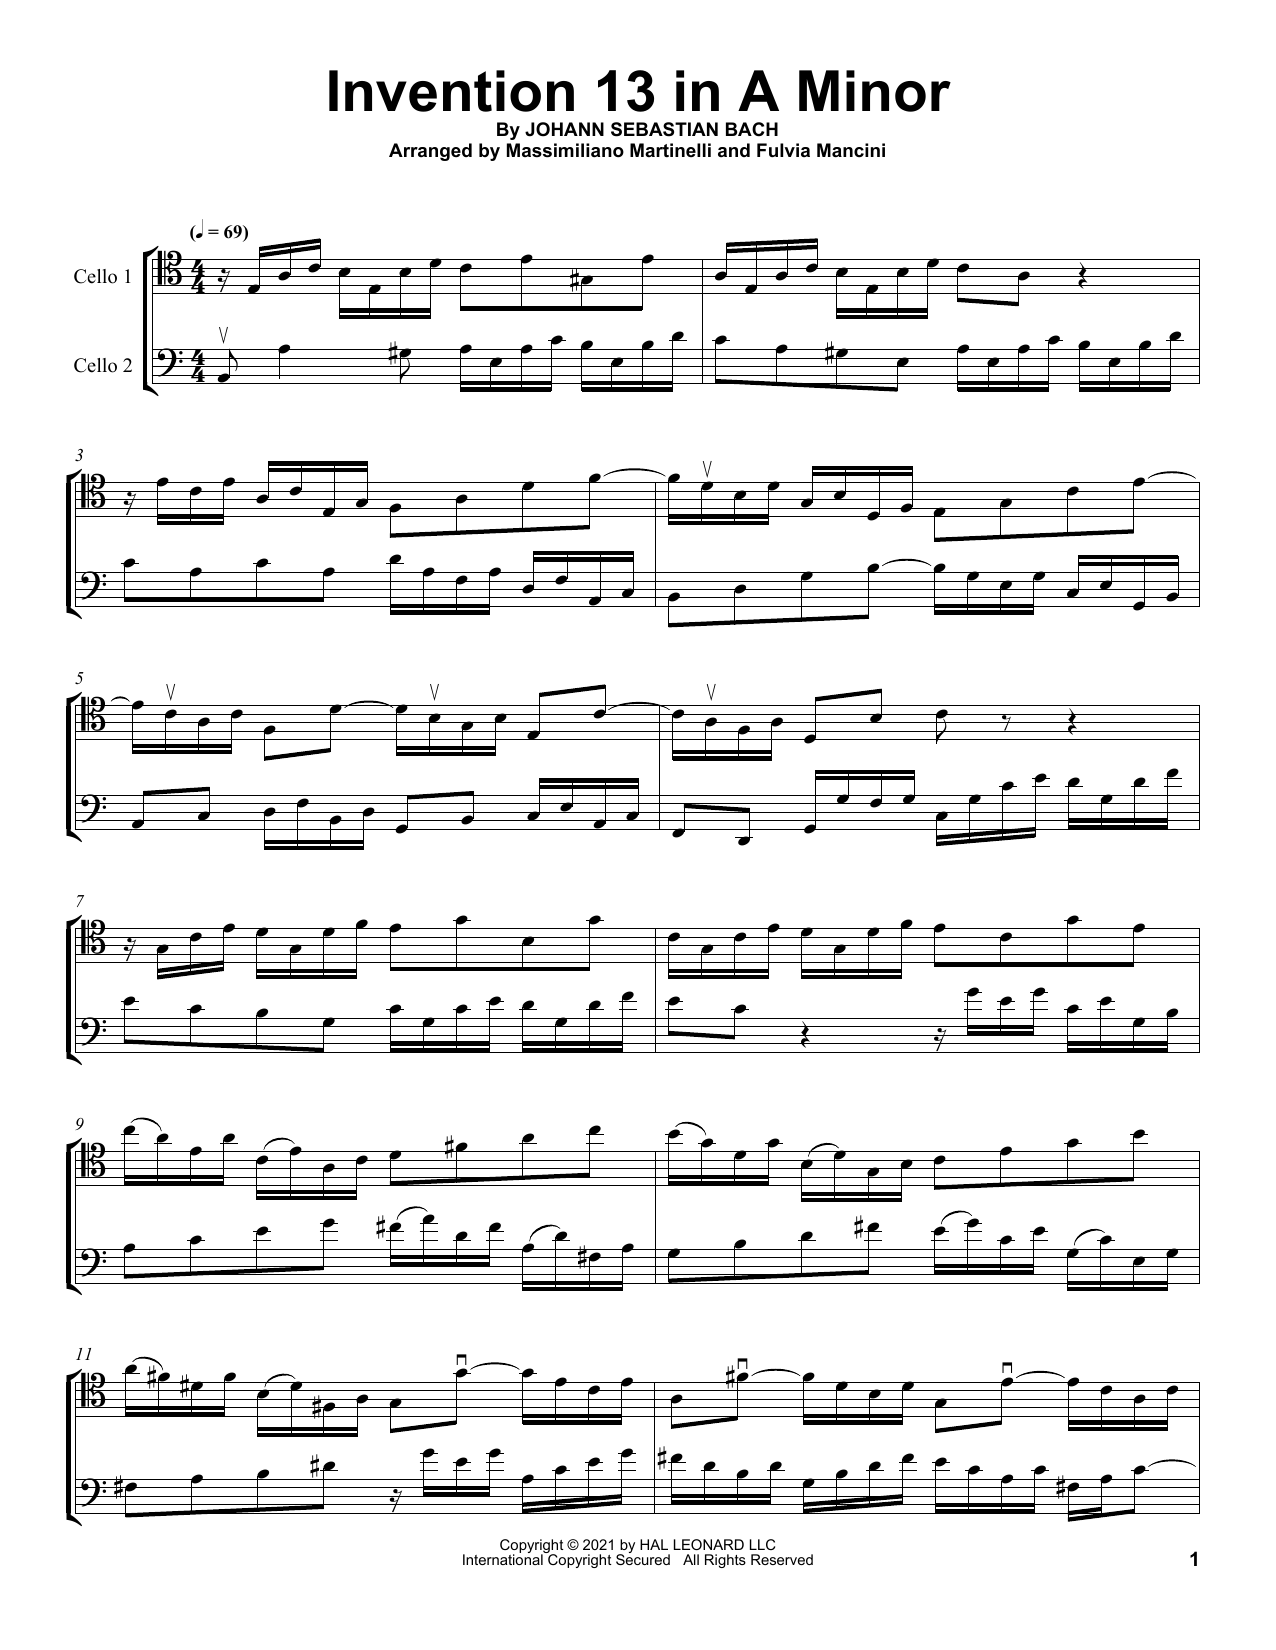 Download Mr & Mrs Cello Invention 13 In A Minor Sheet Music